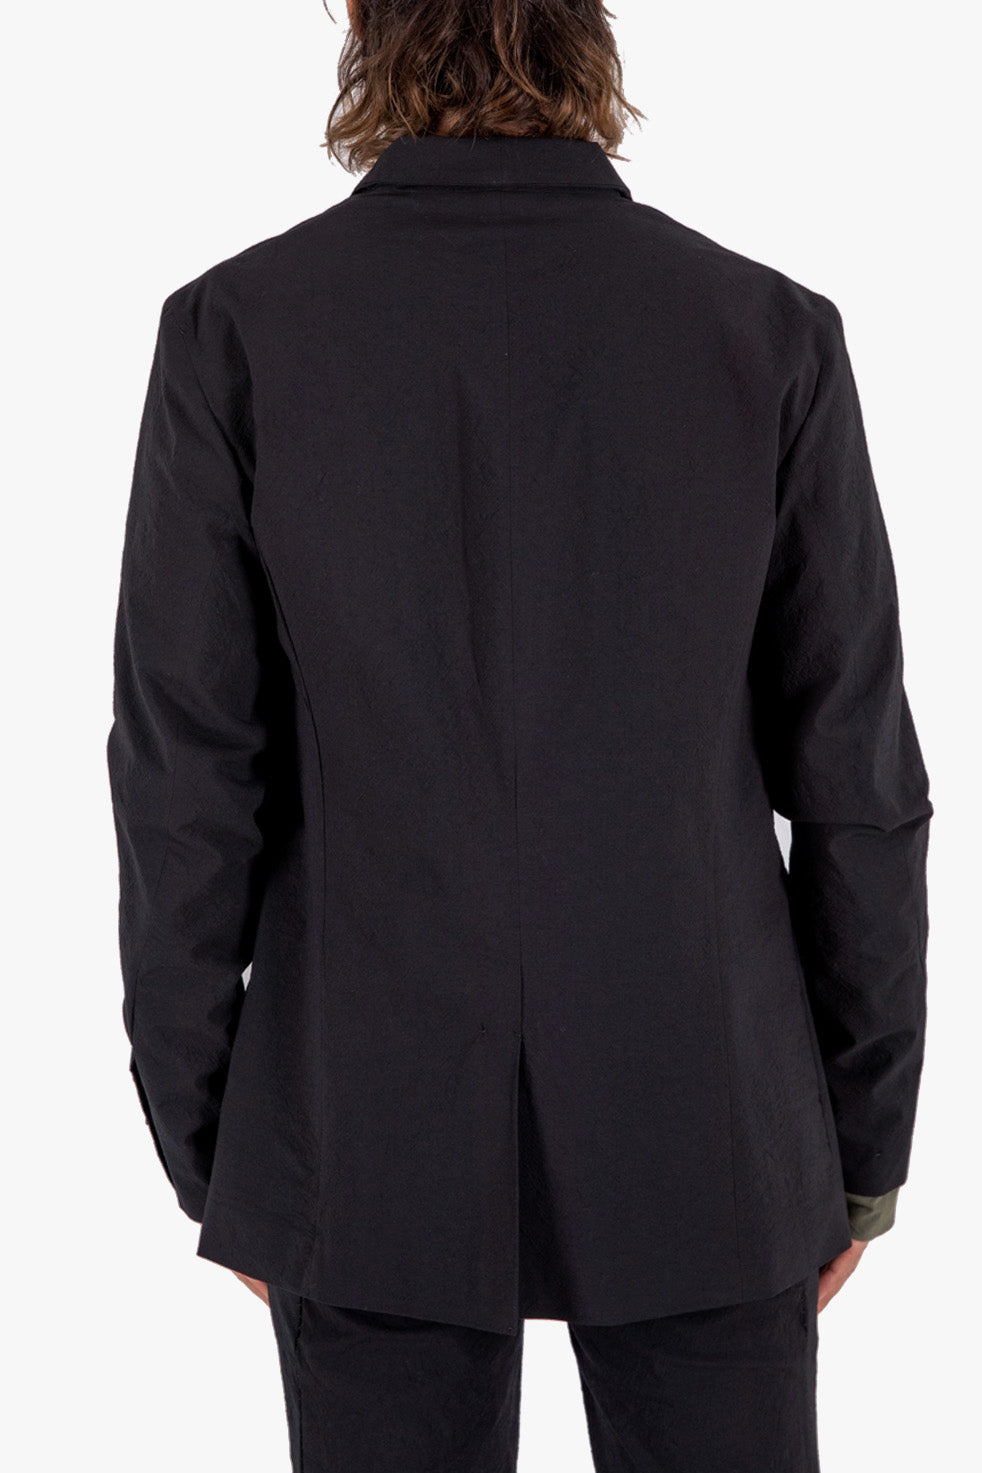 3 button fitted Jacket